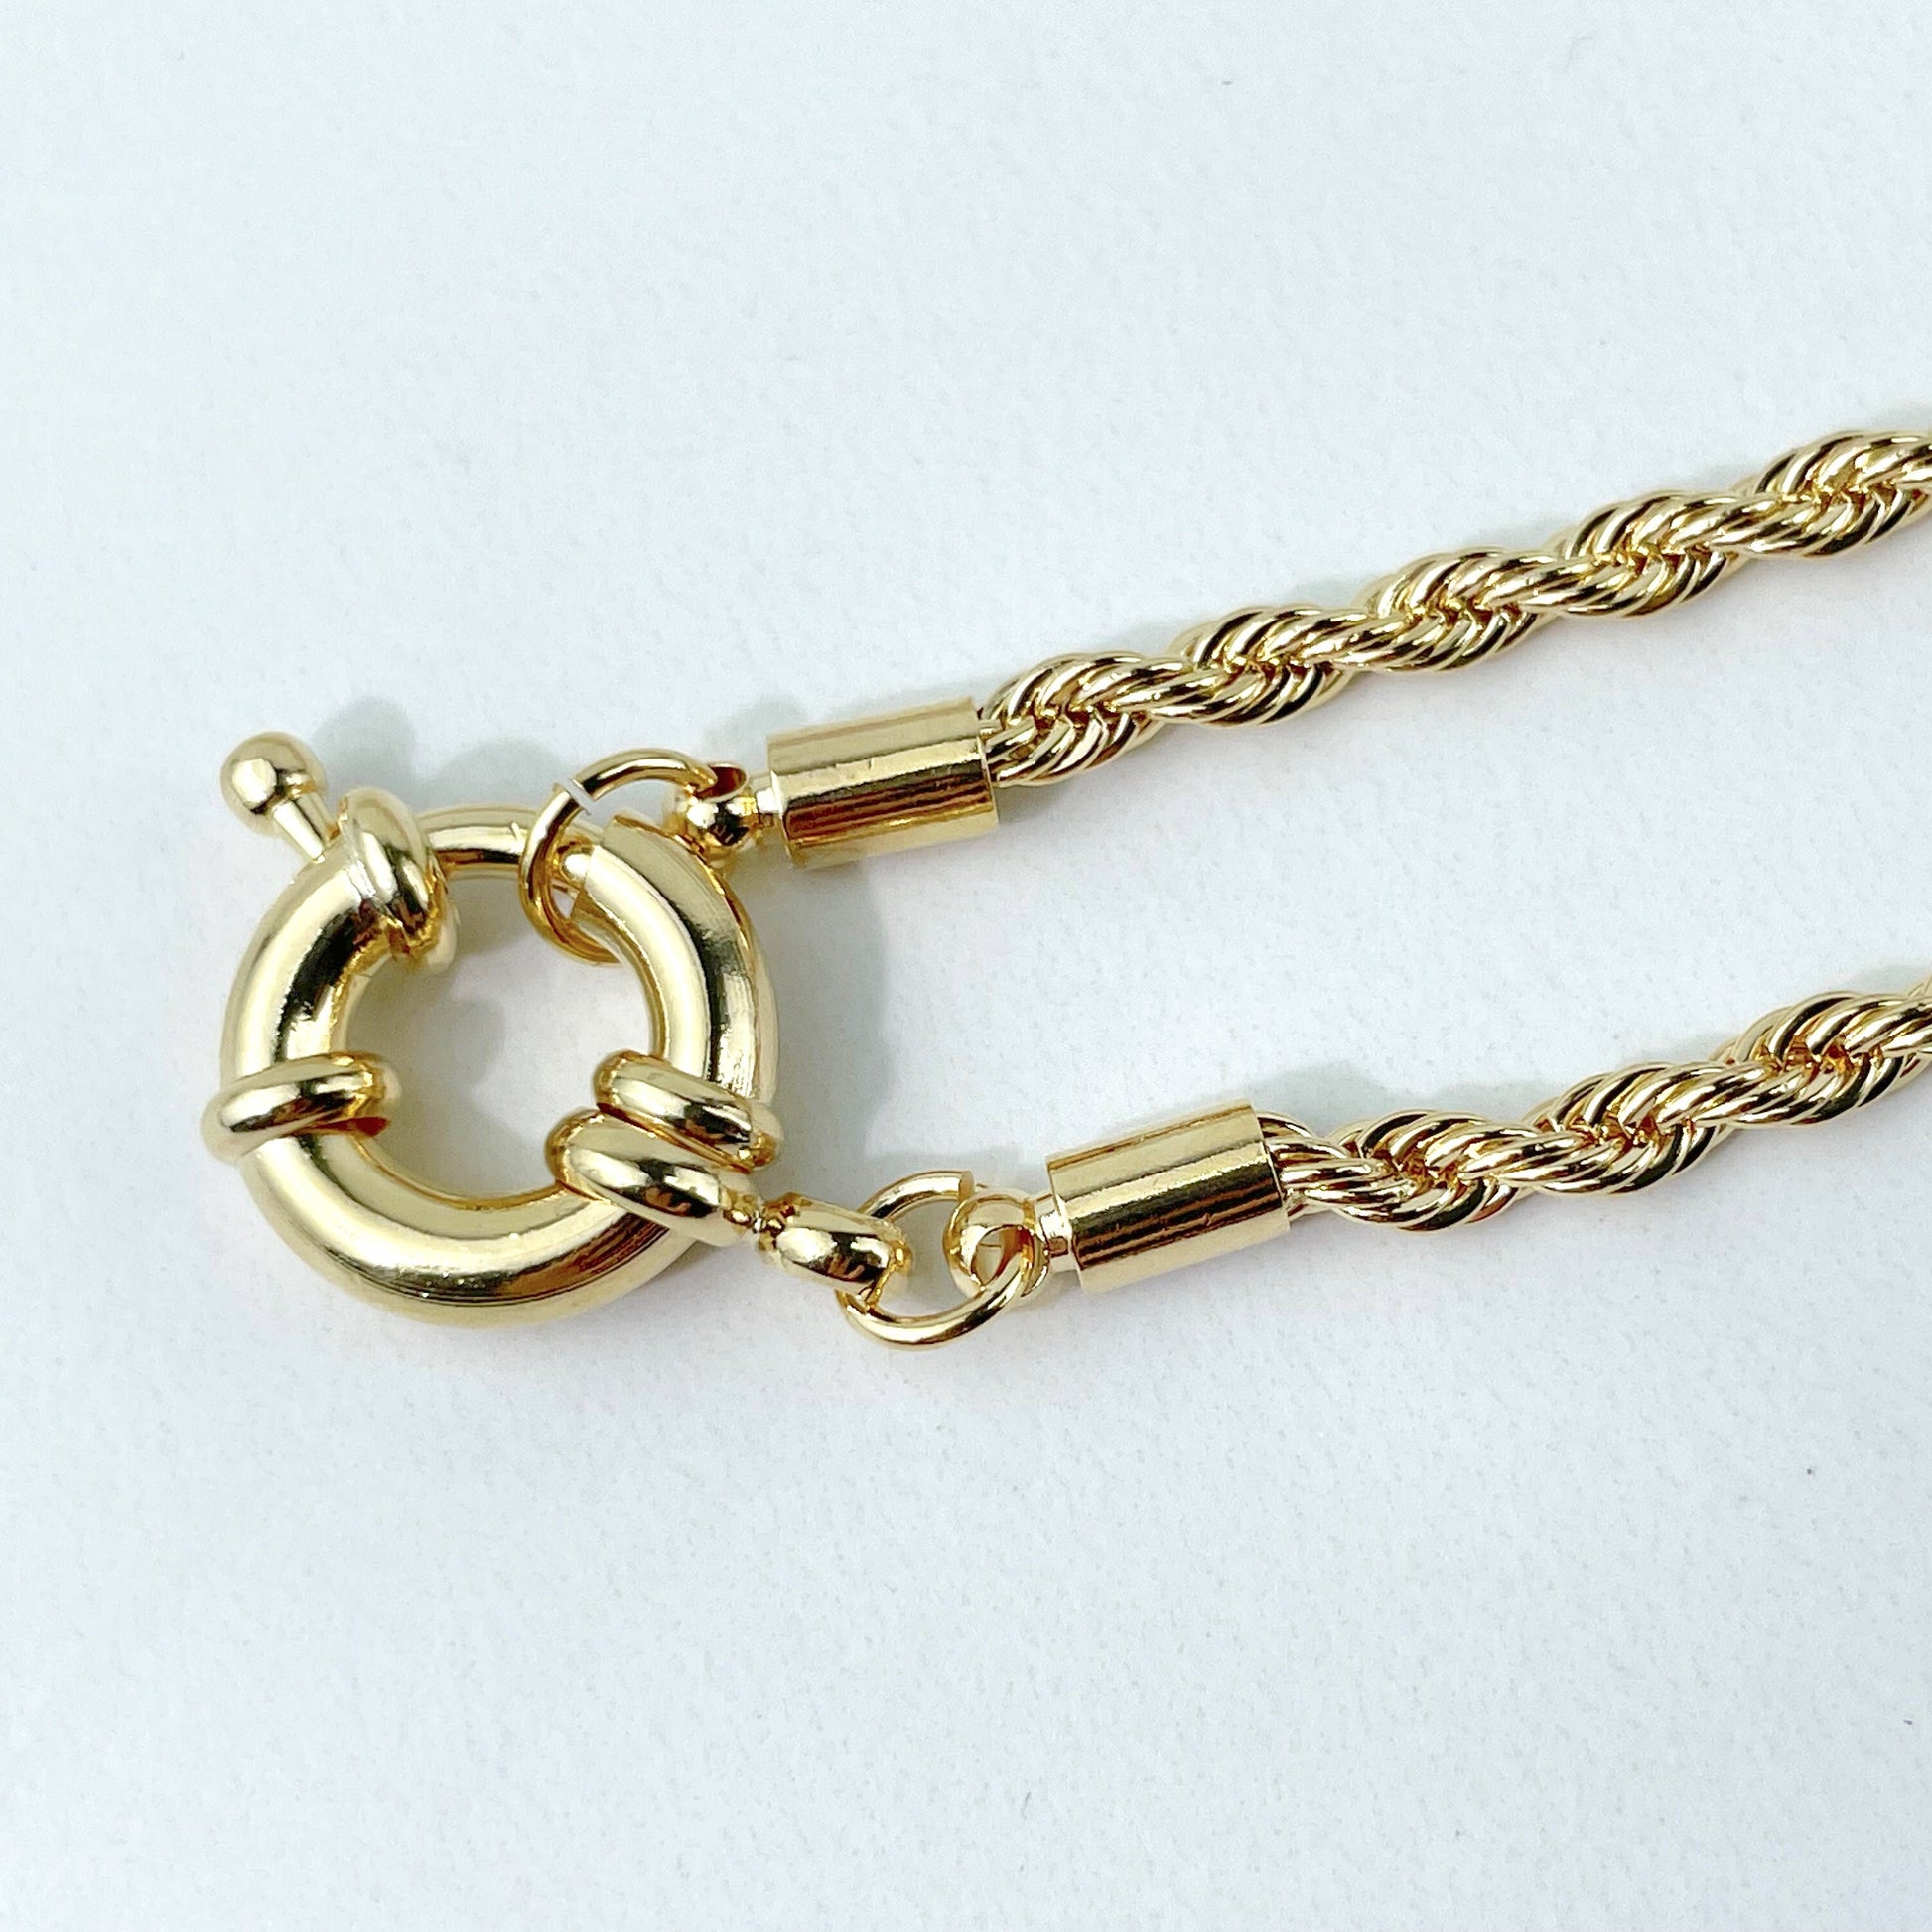 18k Gold Filled 3mm Thickness Rope Chain, Necklace or Bracelet, Spring Ring, Wholesale Jewelry Making Supplies